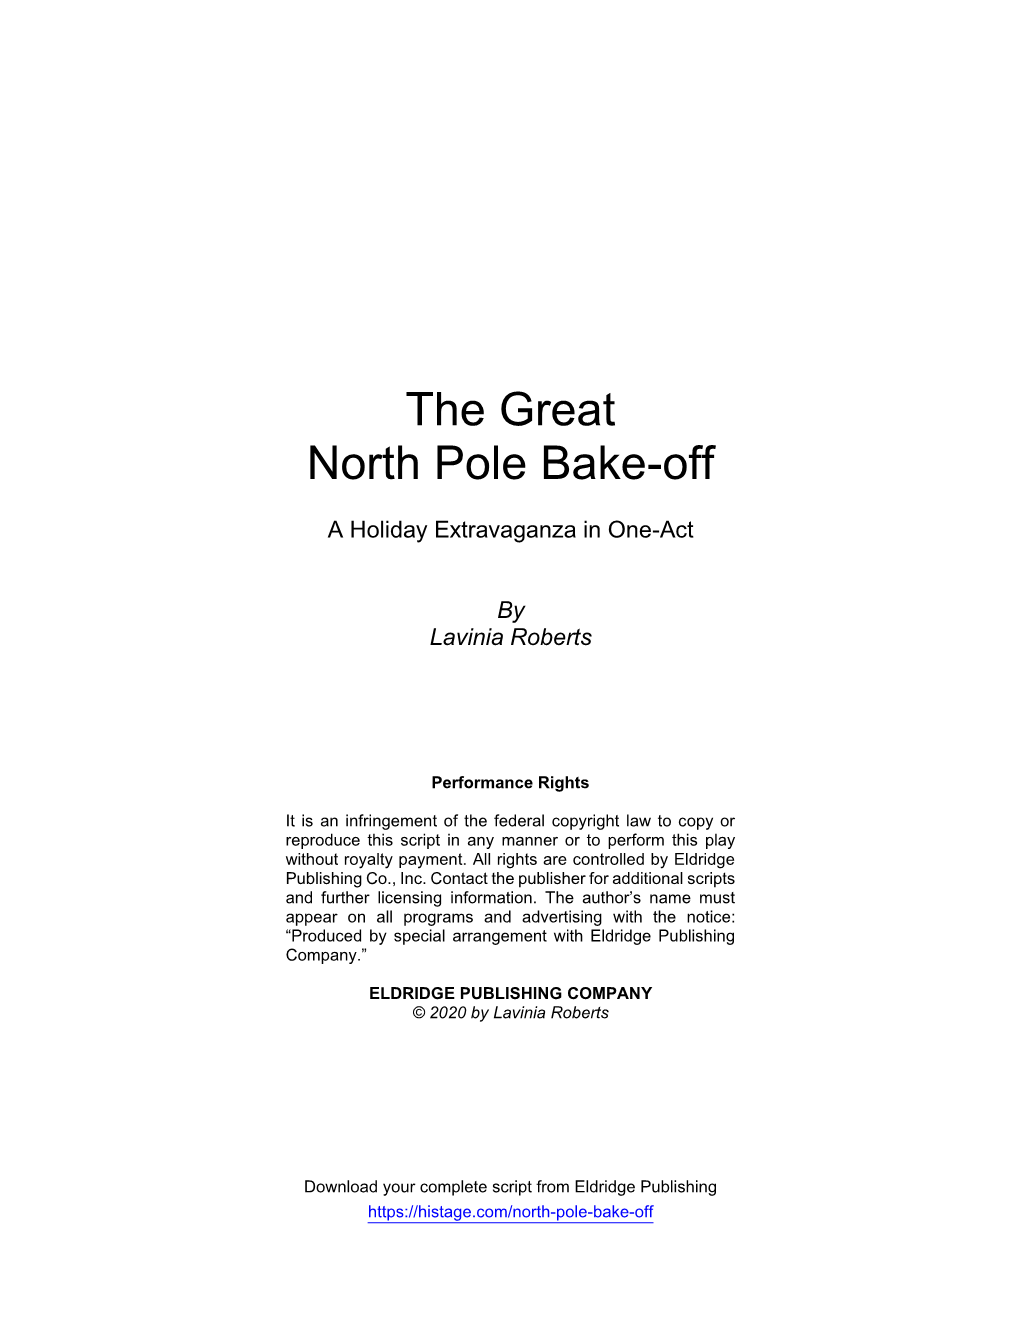 The Great North Pole Bake-Off